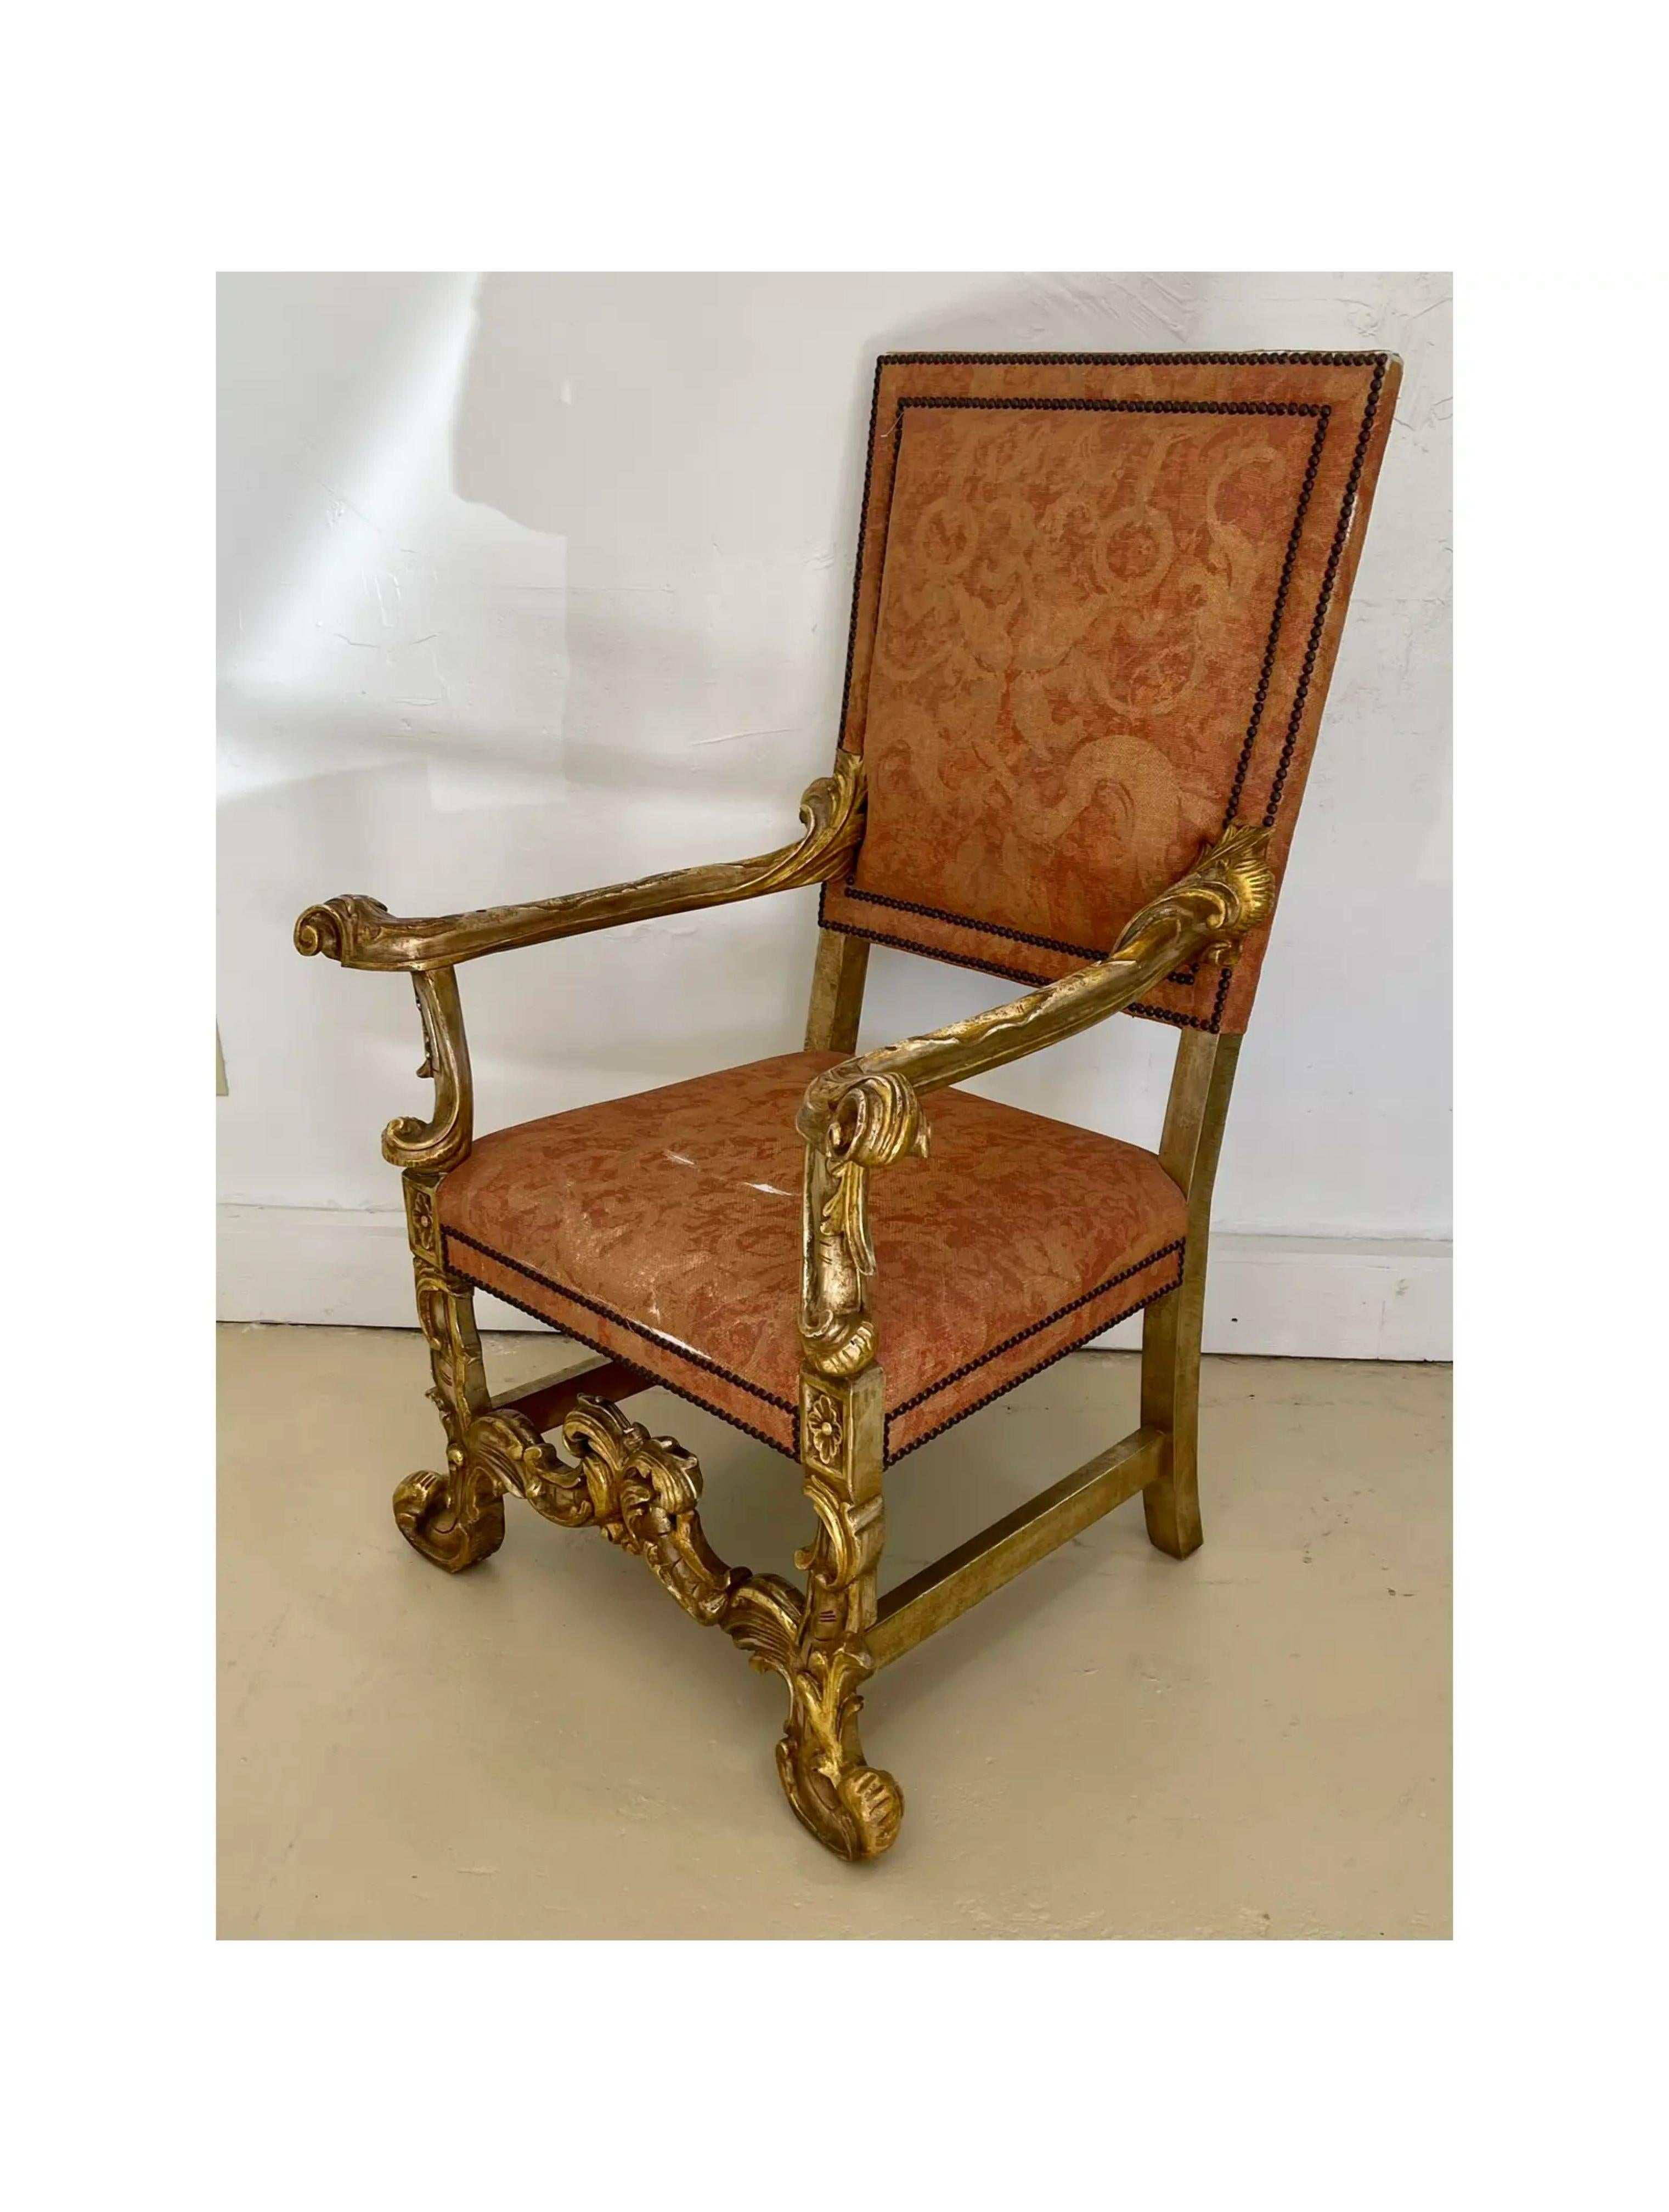 18th Century style Ebanista Spanish Colonial Giltwood throne chair. It is exquisitely carved and gilded.

Additional information: 
Materials: Giltwood, Linen
Color: Gold
Brand: Alfonso Marina
Designer: Alfonso Marina
Period: 1990s
Styles: